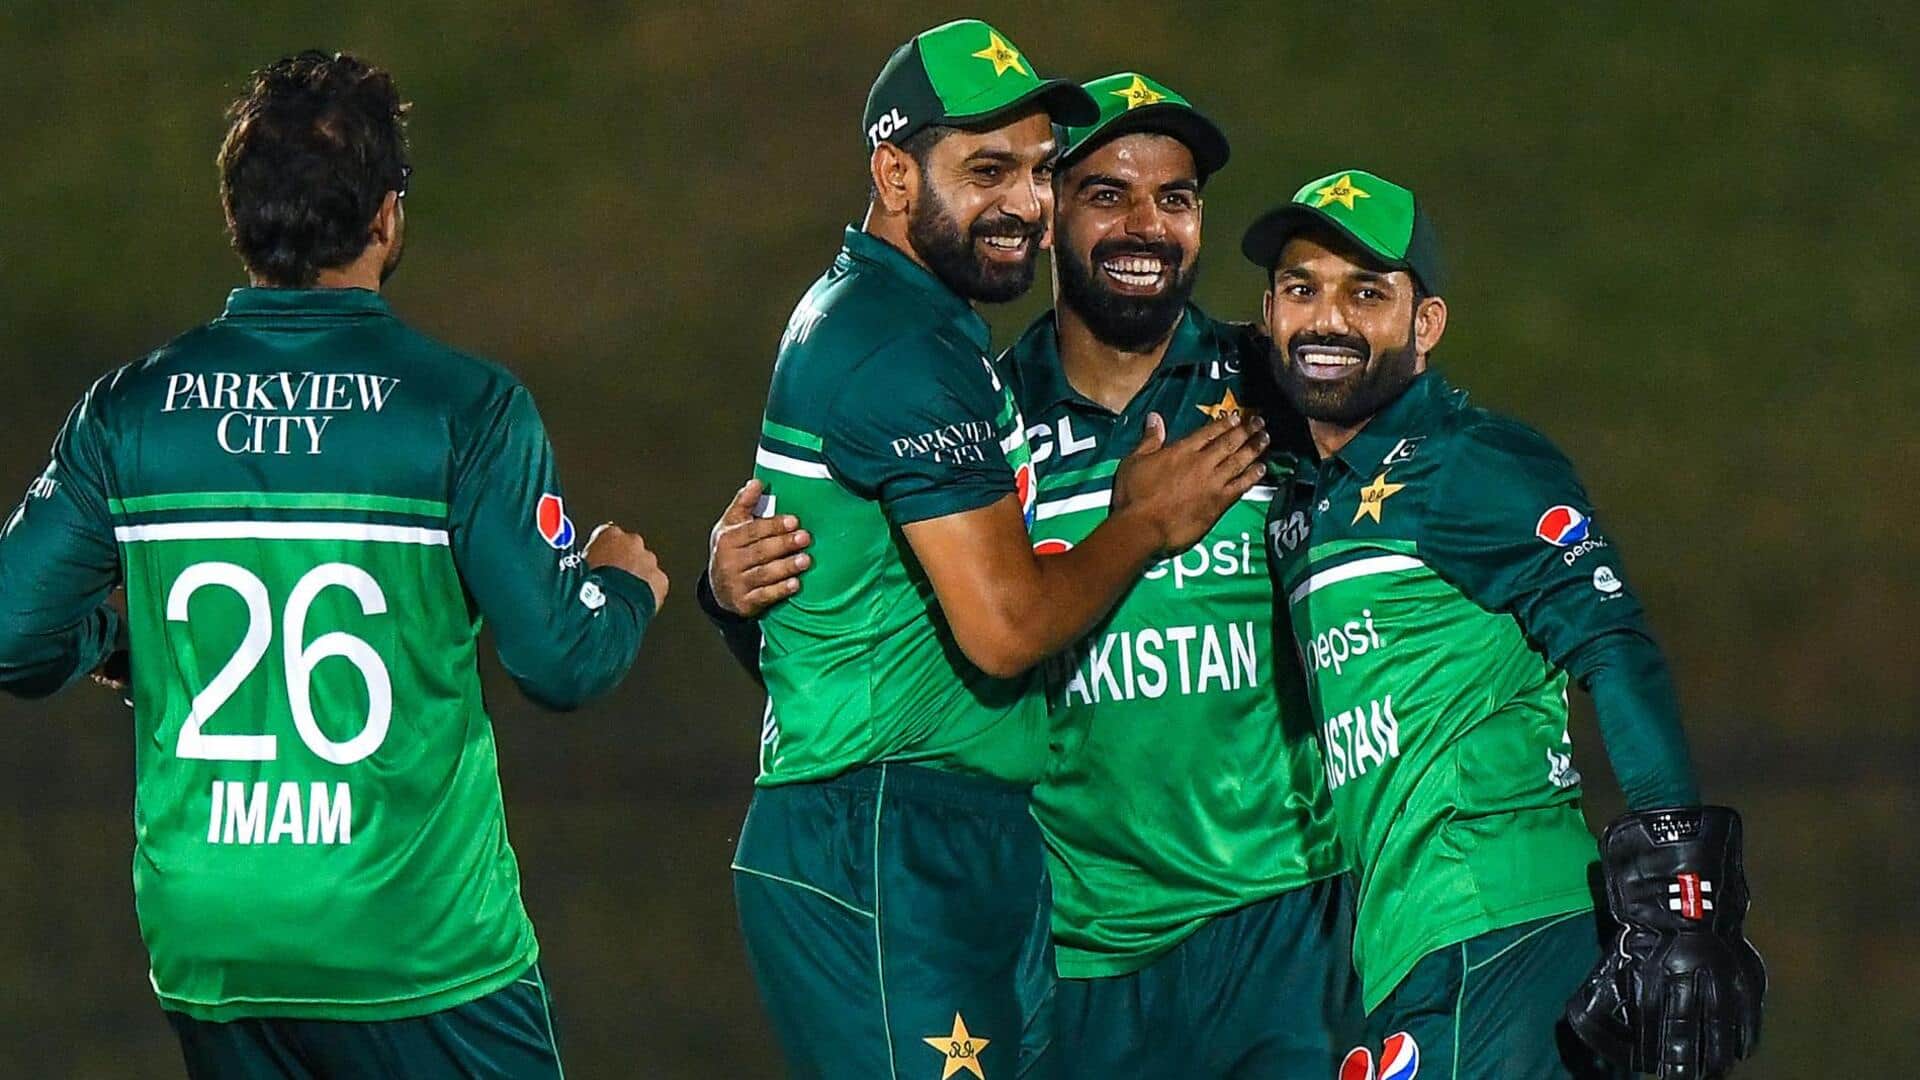 Decoding Pakistan's squad ahead of the ICC Cricket World Cup